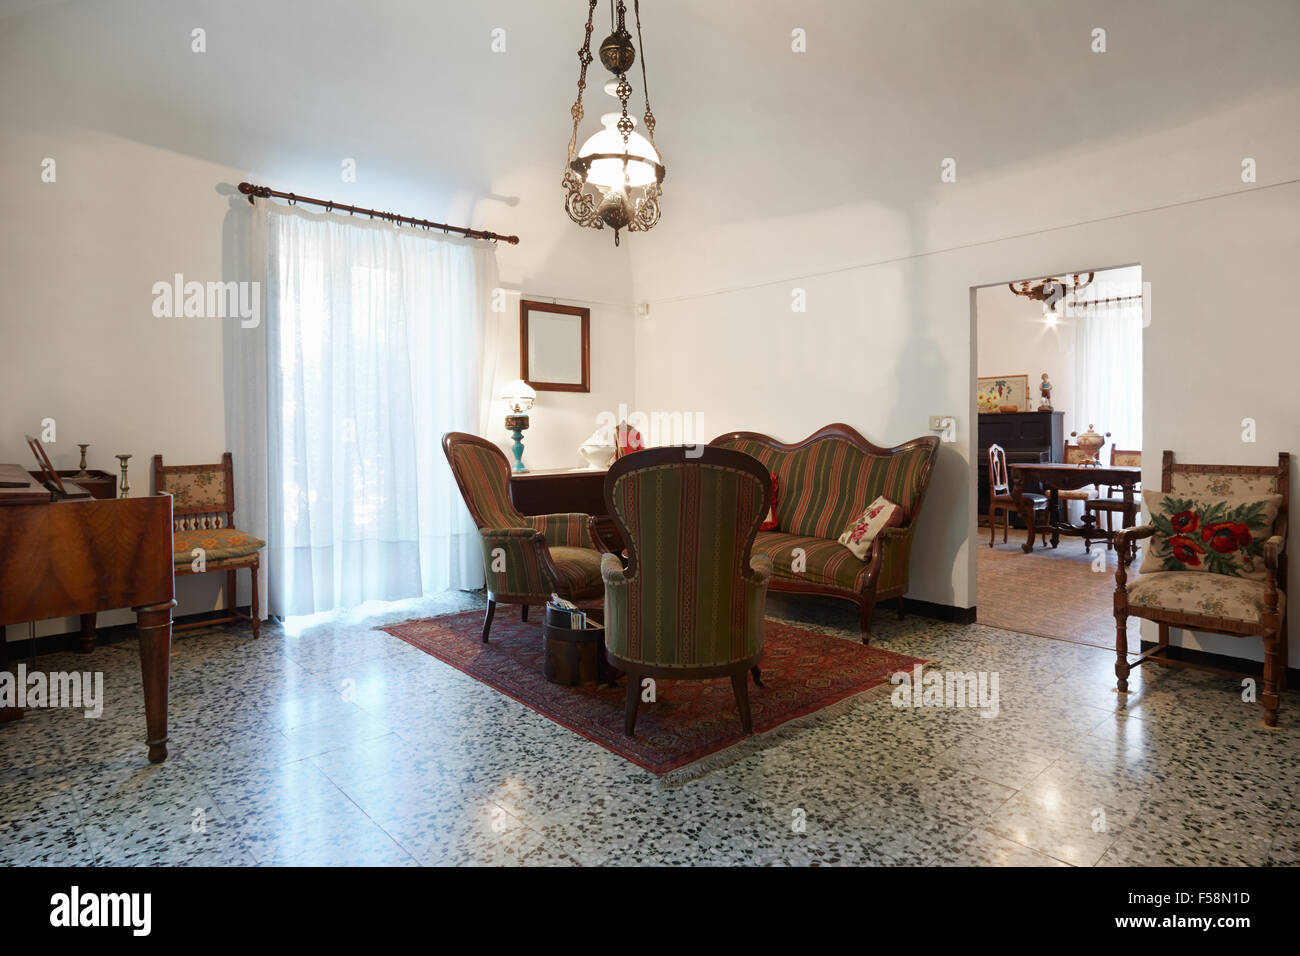 Living room with antiquities, interior Stock Photo